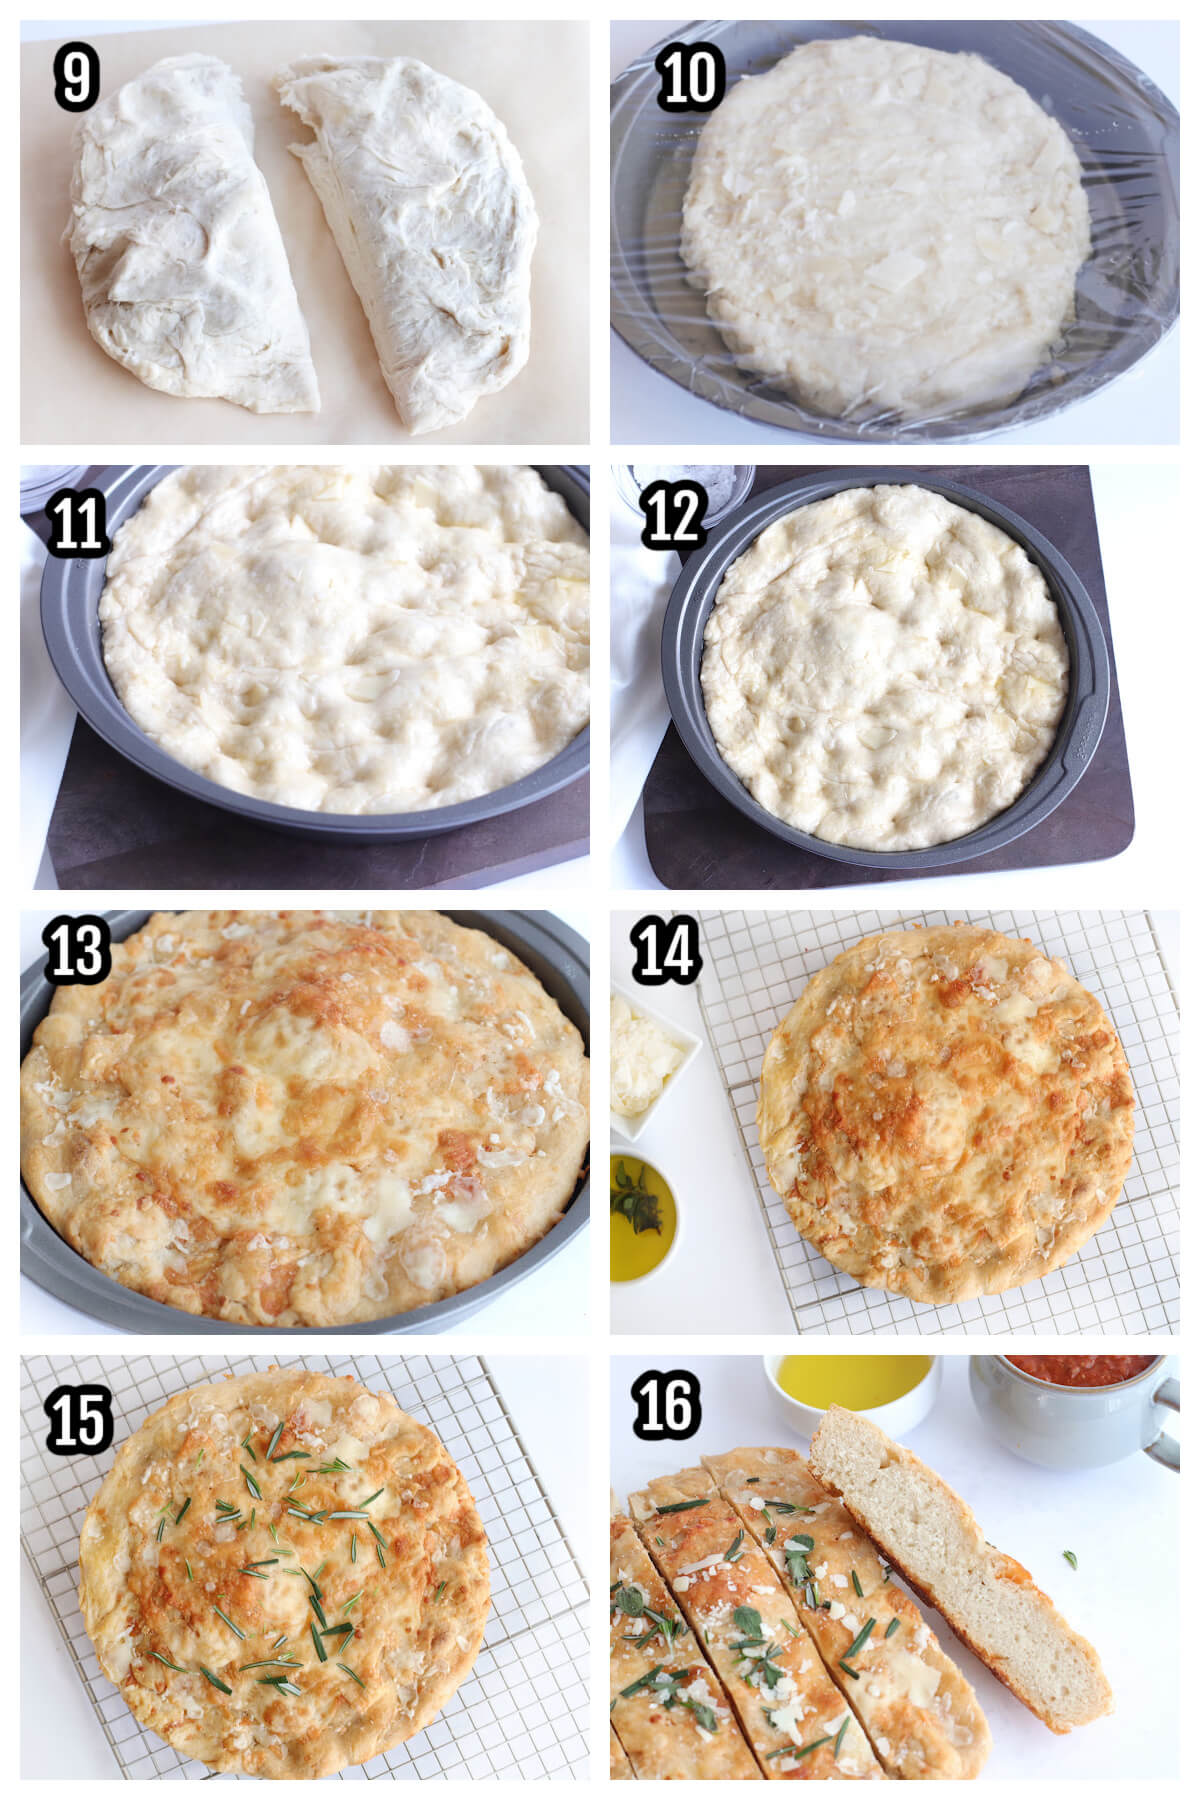 Steps 9 to 16 for making the Italian Focaccia recipe. 